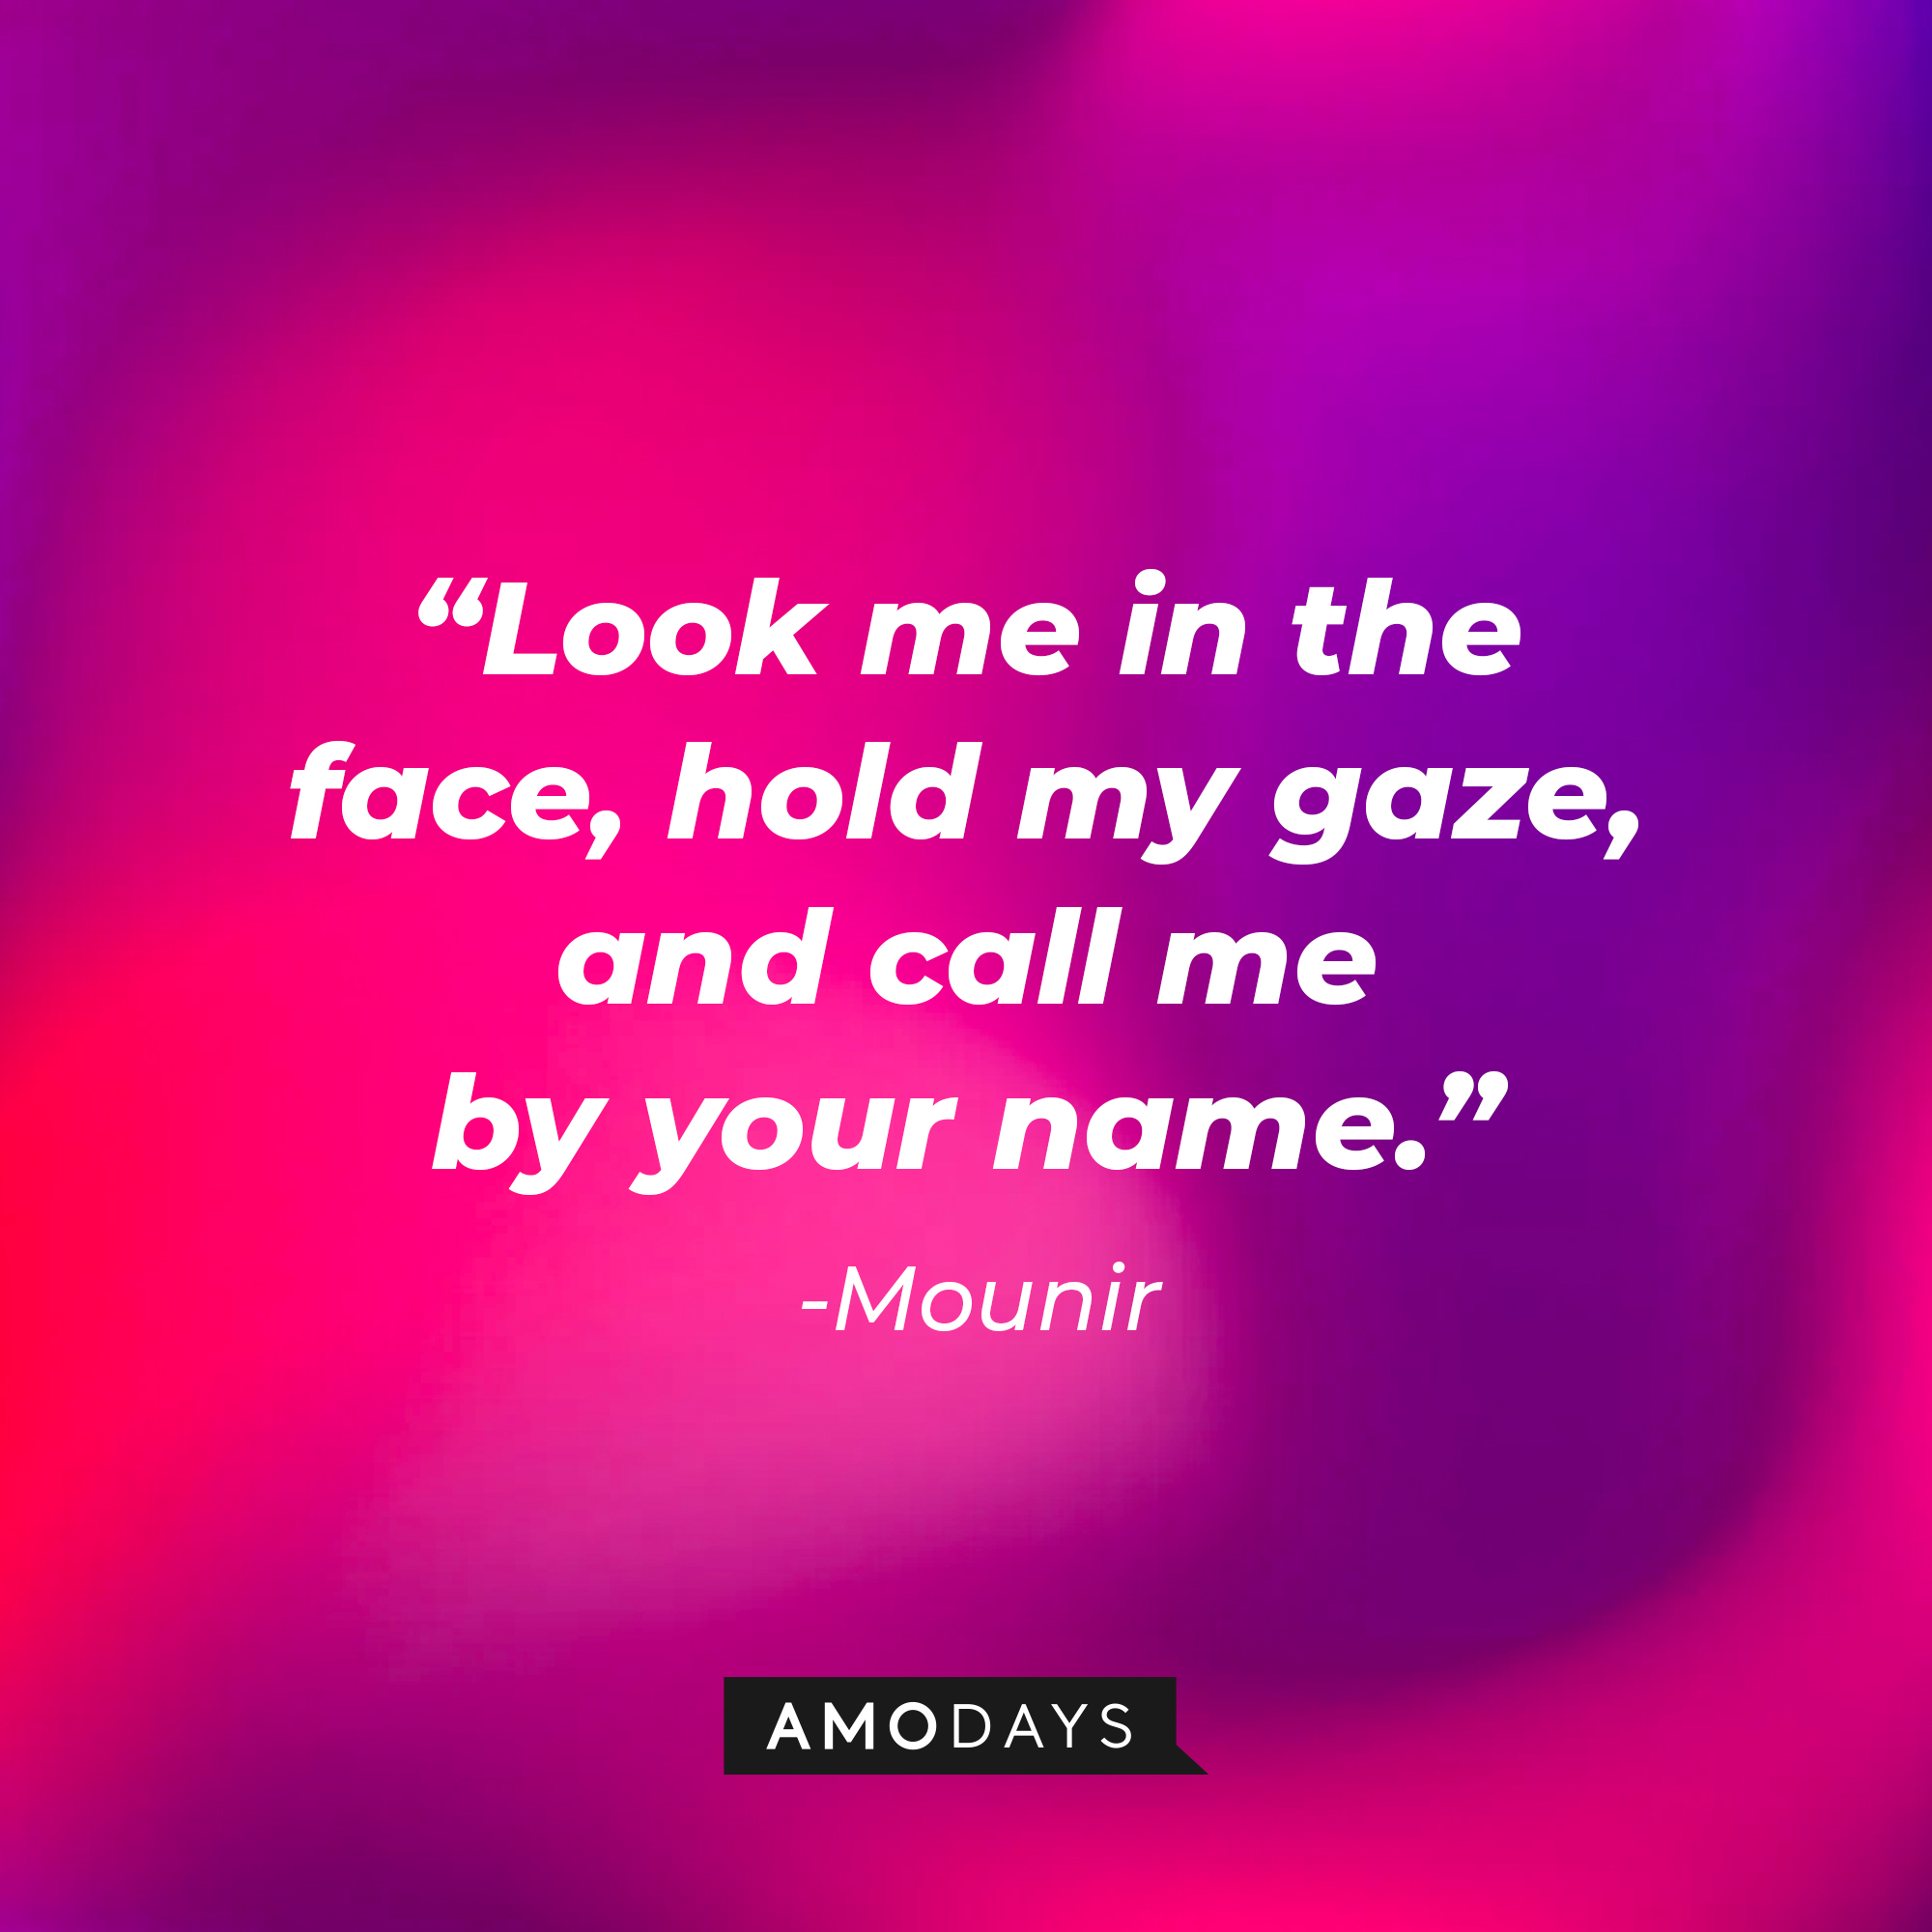 Mounir's quote: "Look me in the face, hold my gaze, and call me by your name." | Source: AmoDays